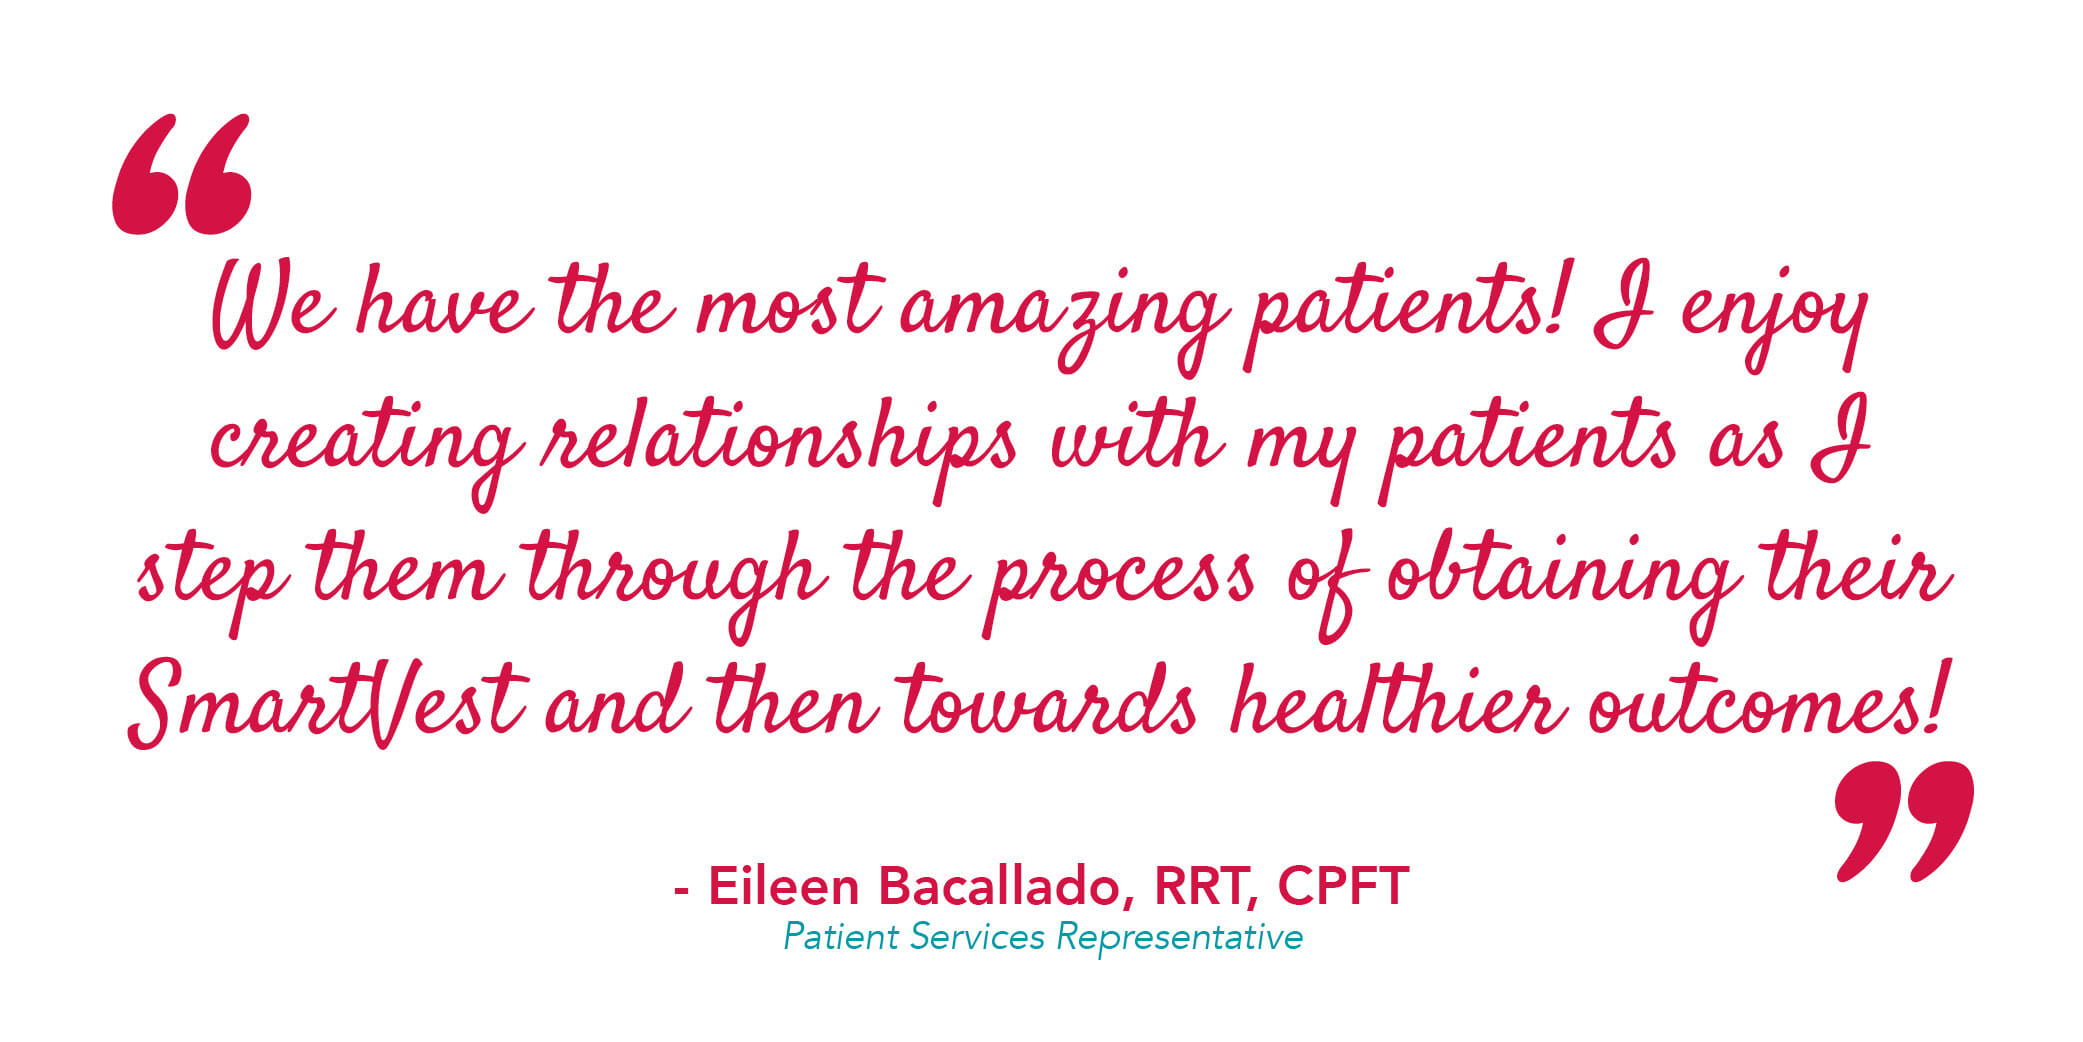 Pull quote by Eileen Bacallado, RRT, CPFT